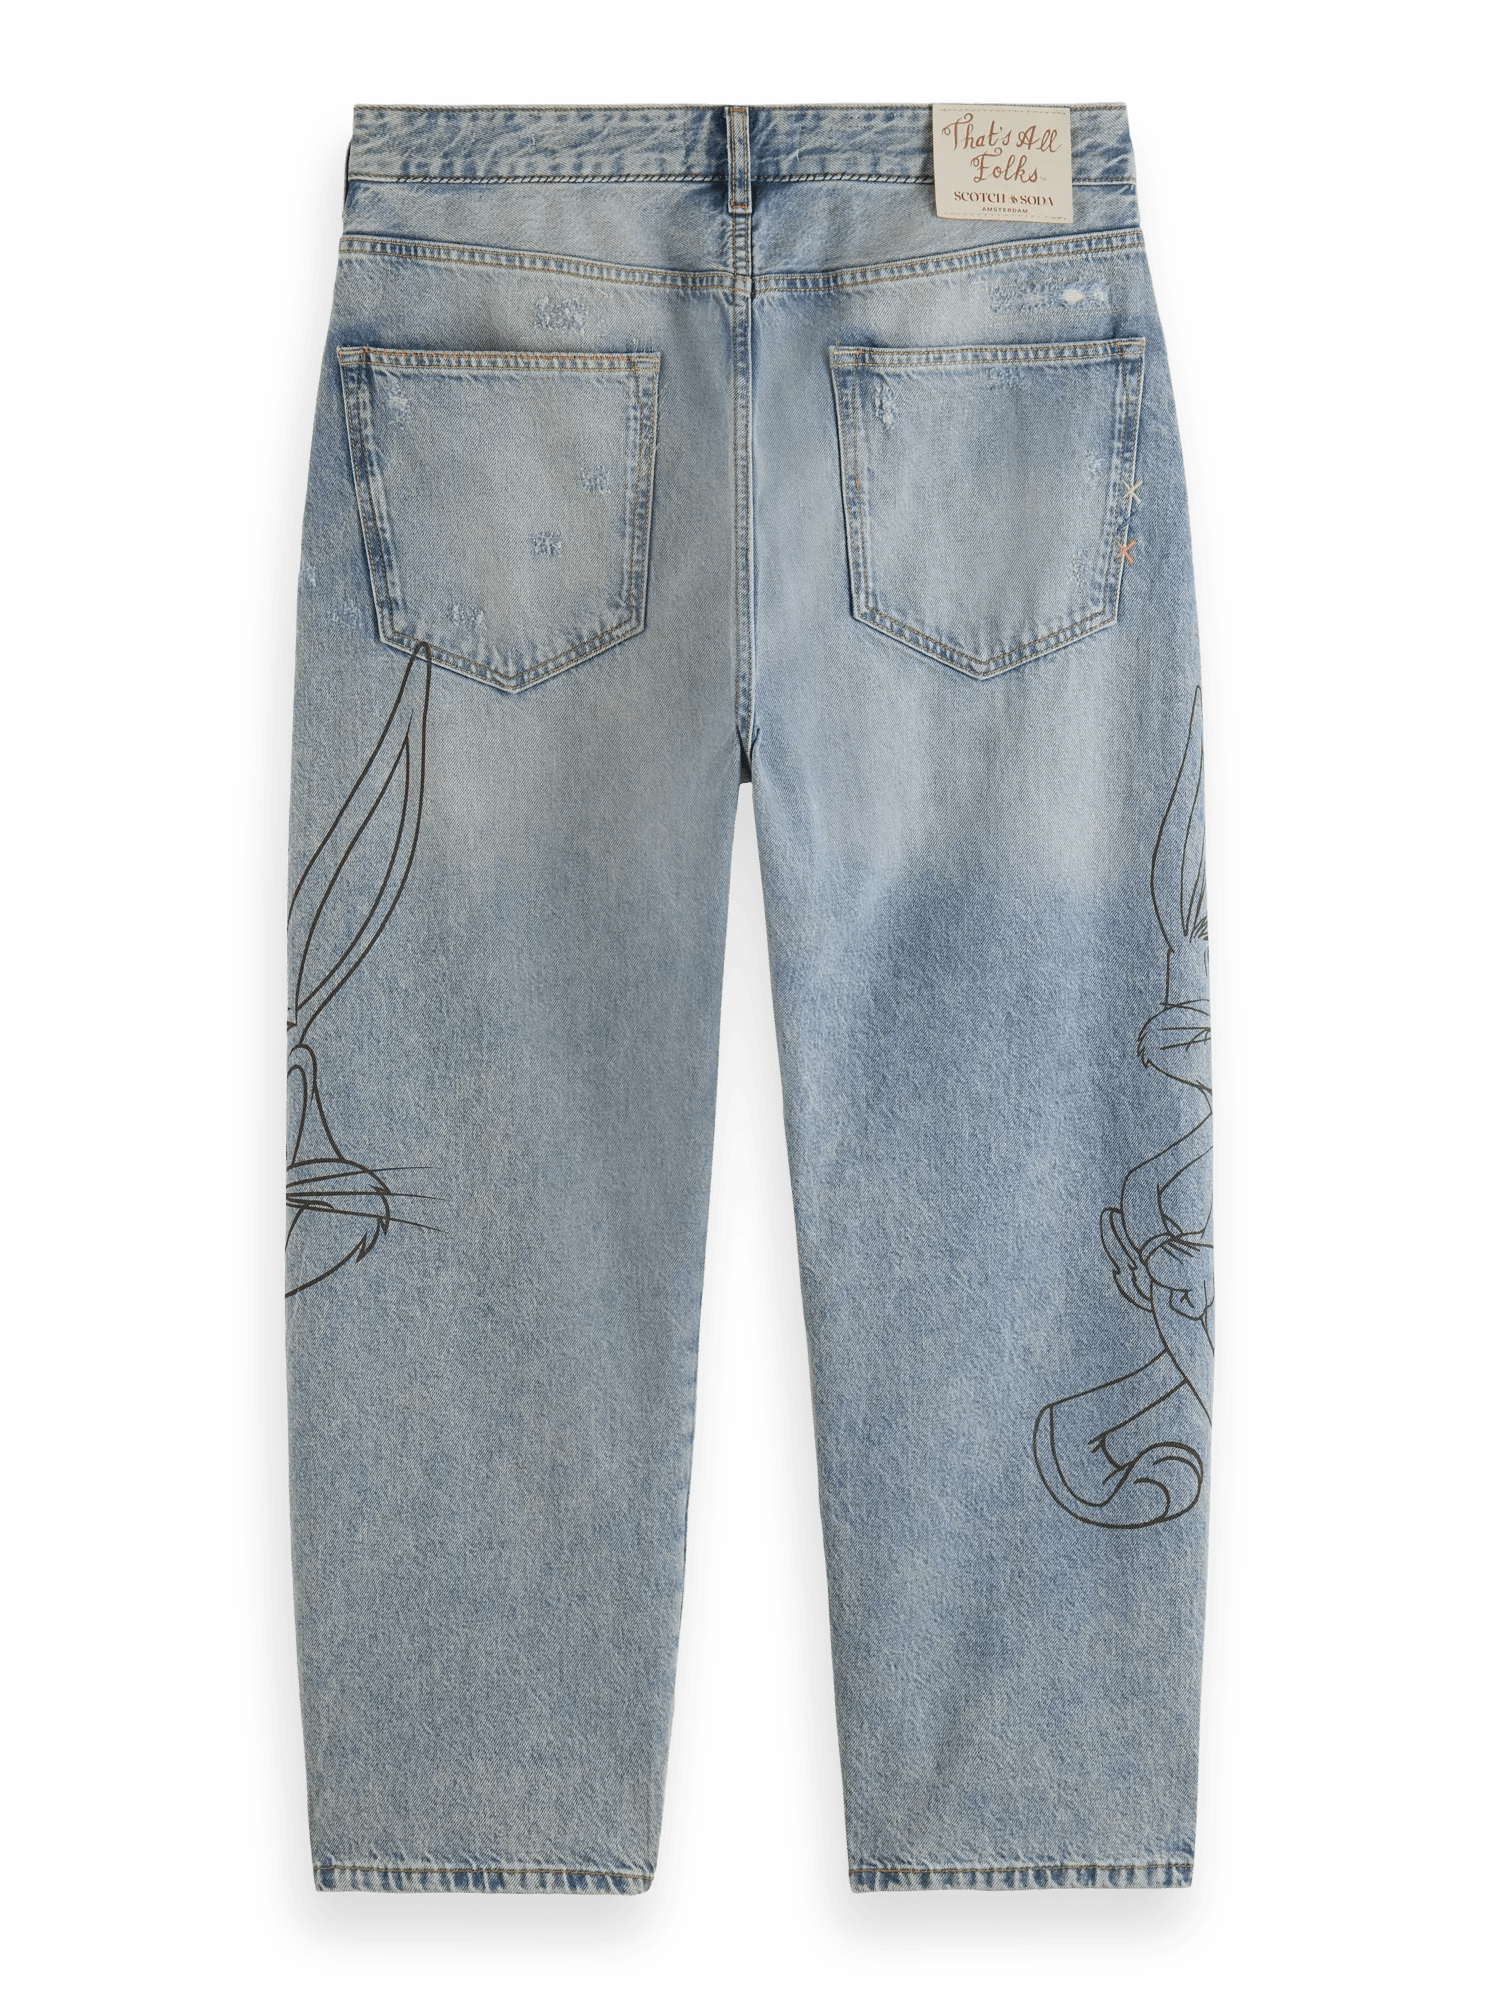 Scotch & Soda Bugs Bunny- The Spirit unisex relaxed jean -That's All Folks BCK